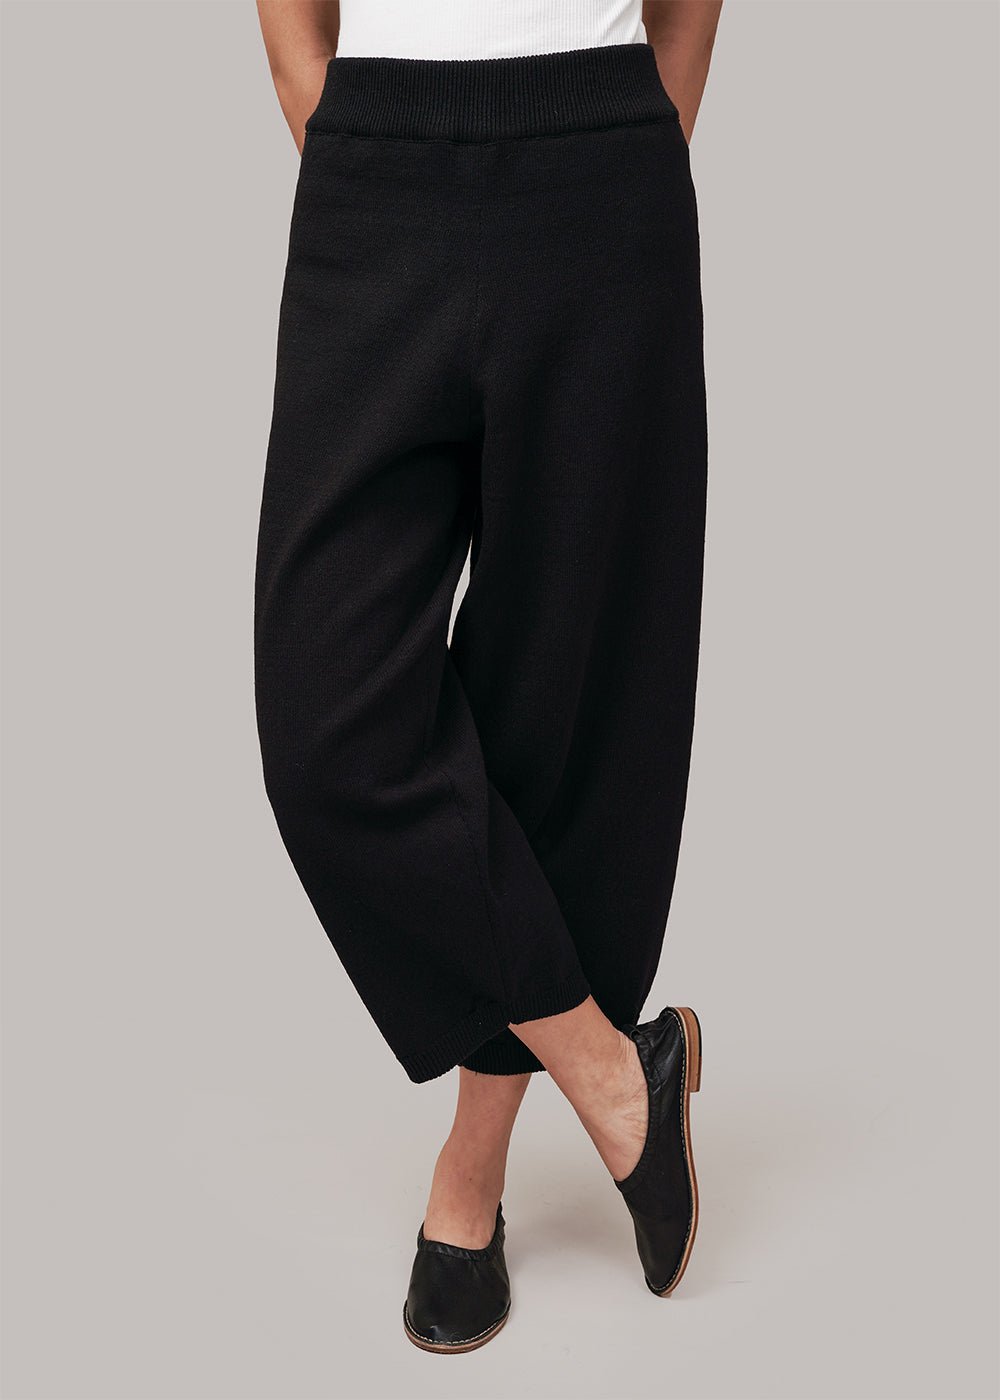 Cordera Black Cotton Knitted Pants - New Classics Studios Sustainable Ethical Fashion Canada